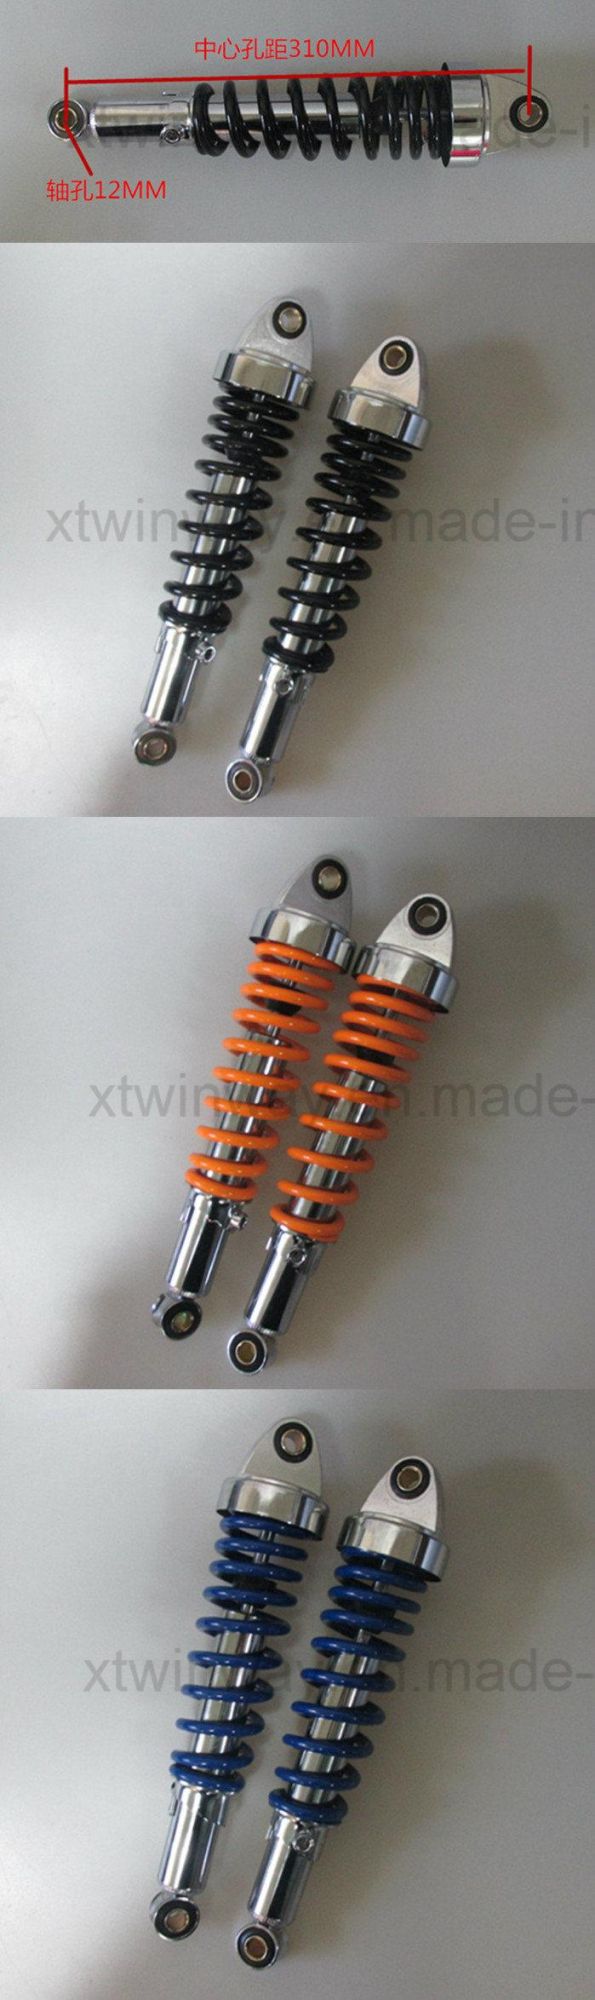 Ww-2039 Motorcycle Parts Oil Pressure Rear Shock Absorber for Suzuki GS150